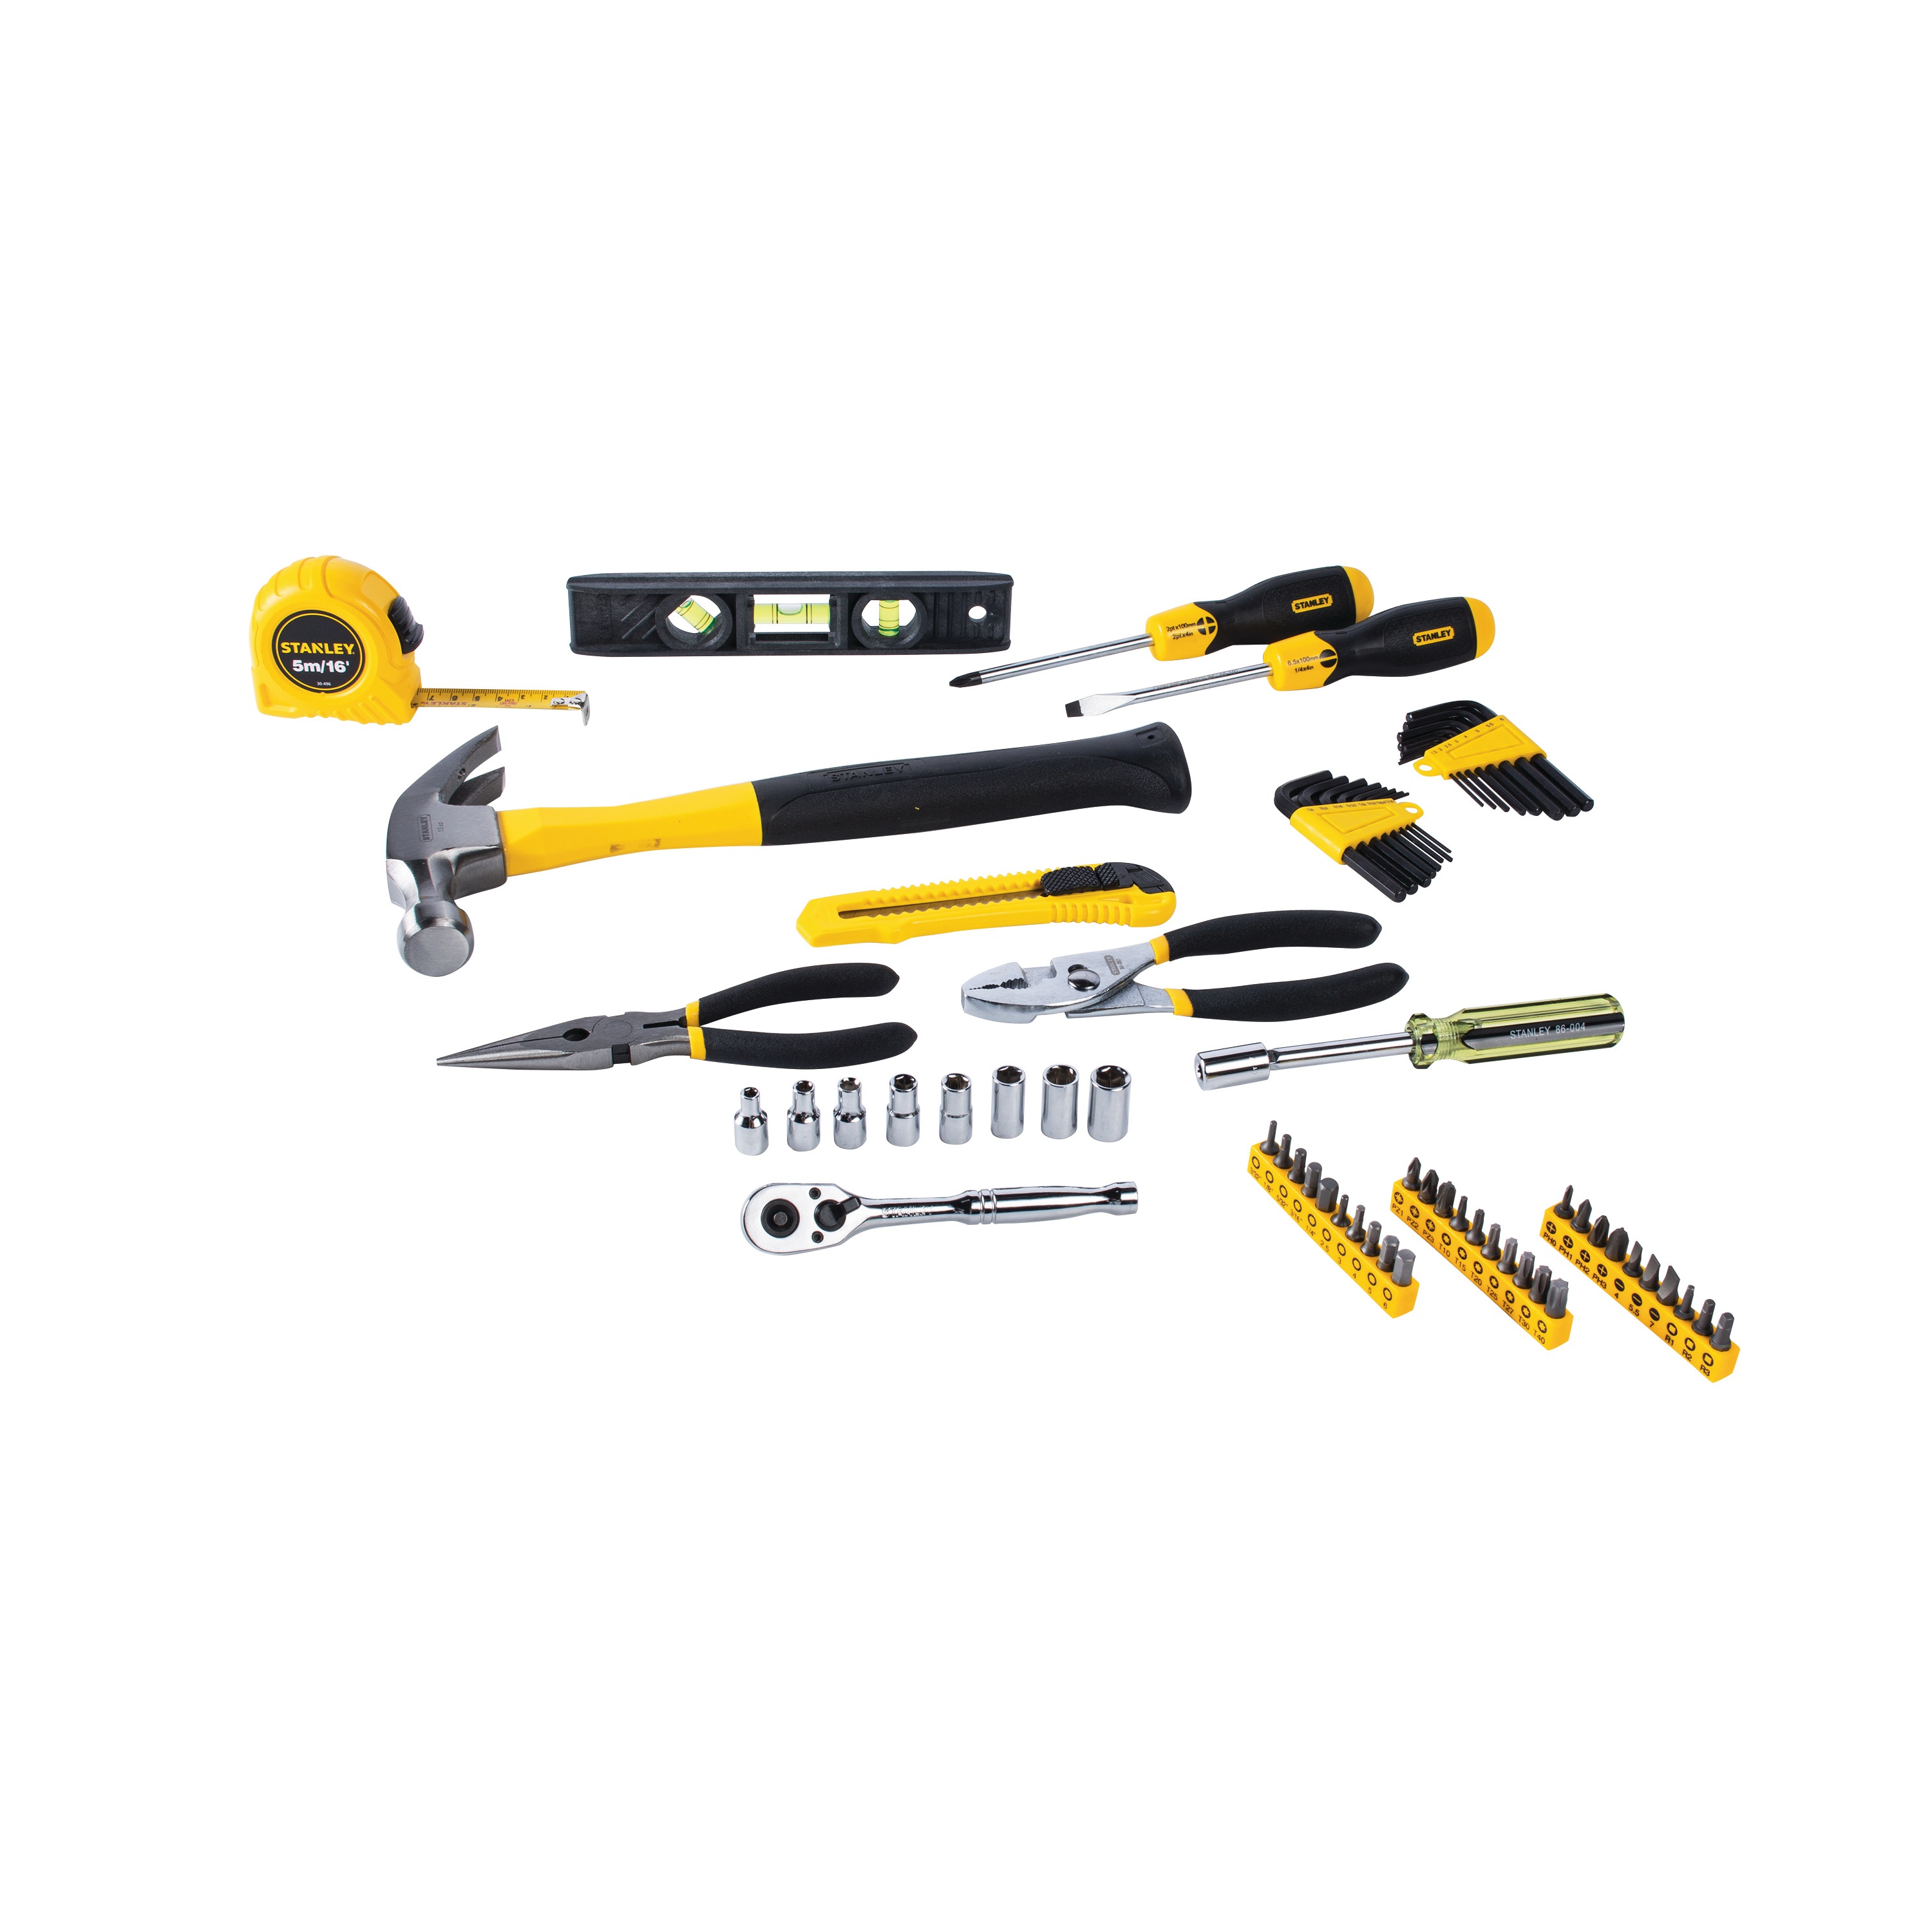 Stanley Tools - 65 pc Homeowners Tool Kit - 94-248